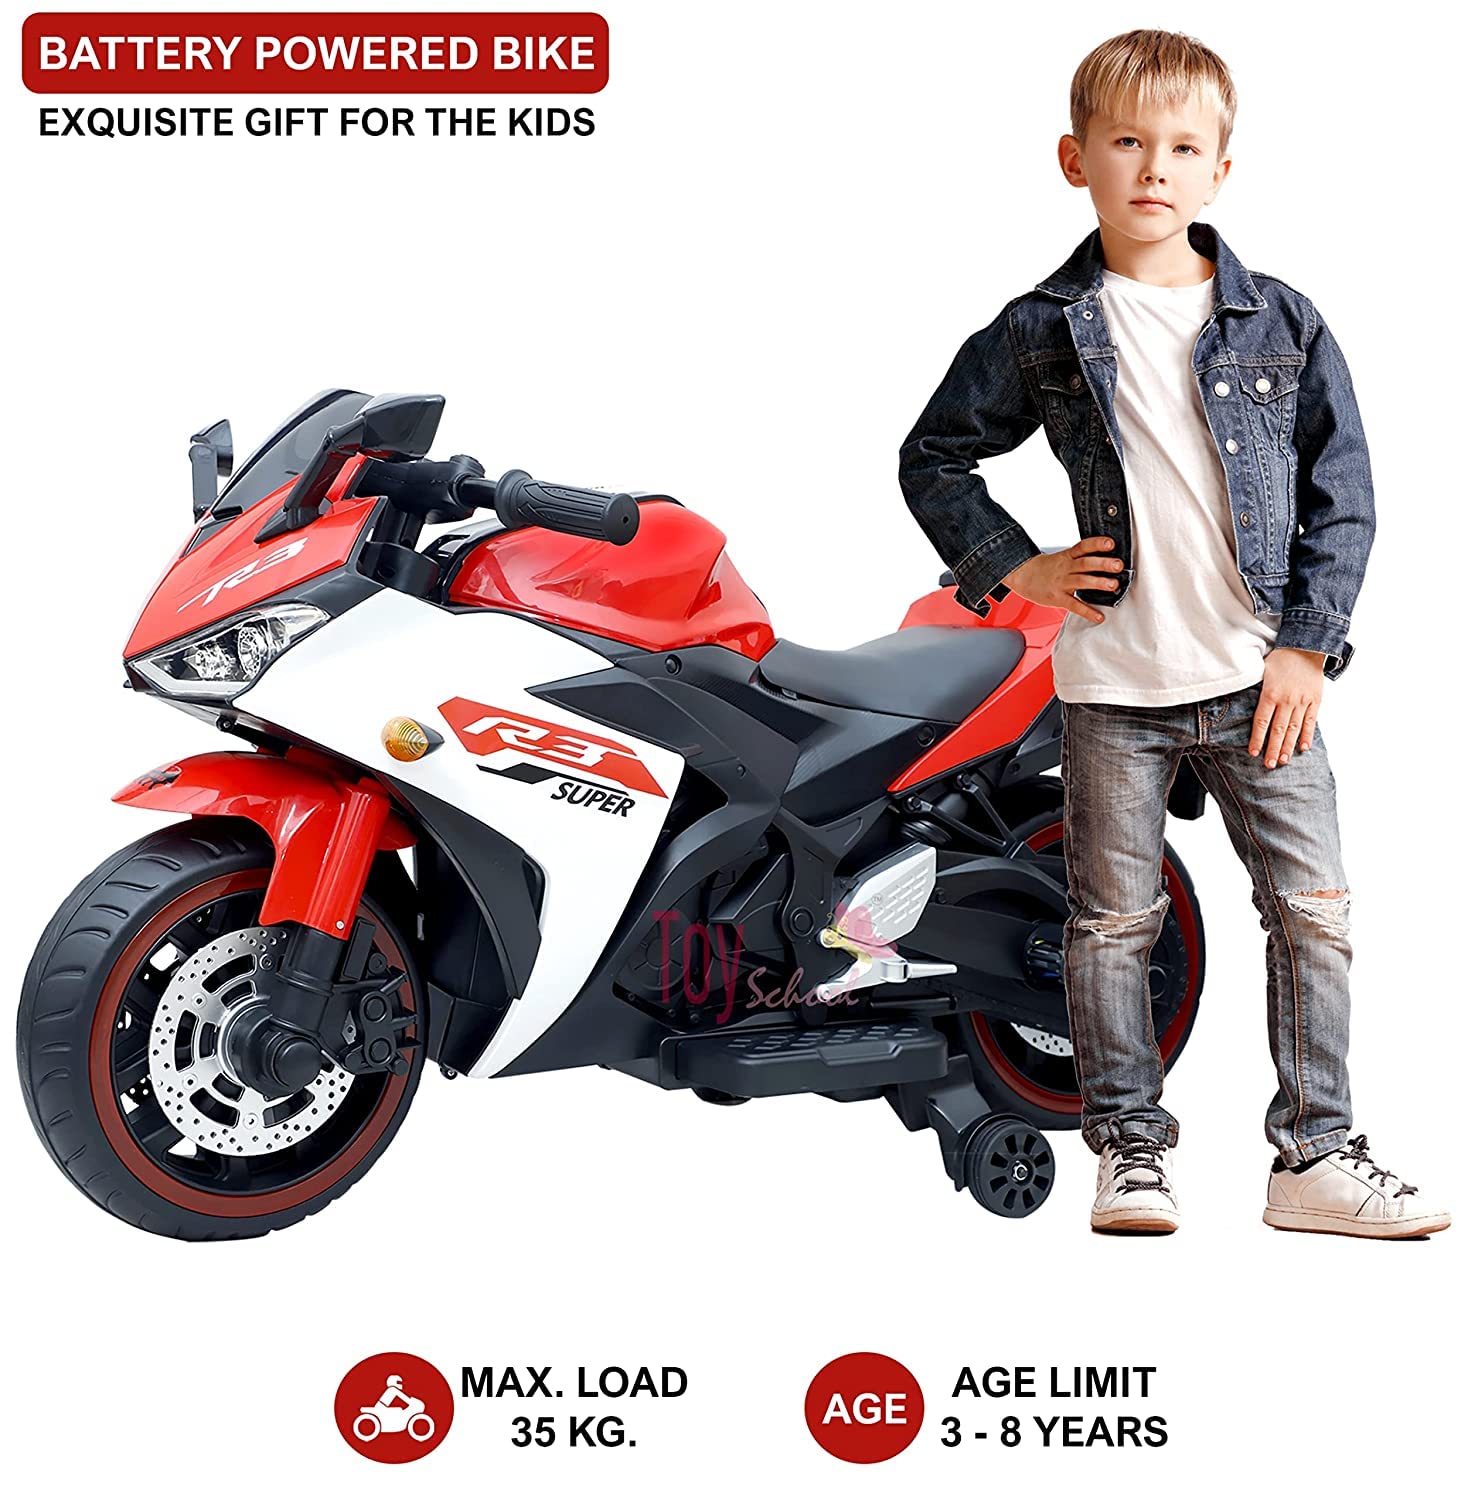 Alstoy Bike for Kids Toy R3 Bike with Rechargeable Battery Operated Ride on  for Boys and Girls | Electric Children Ride on [3 to 8 Years, Large, Red]…